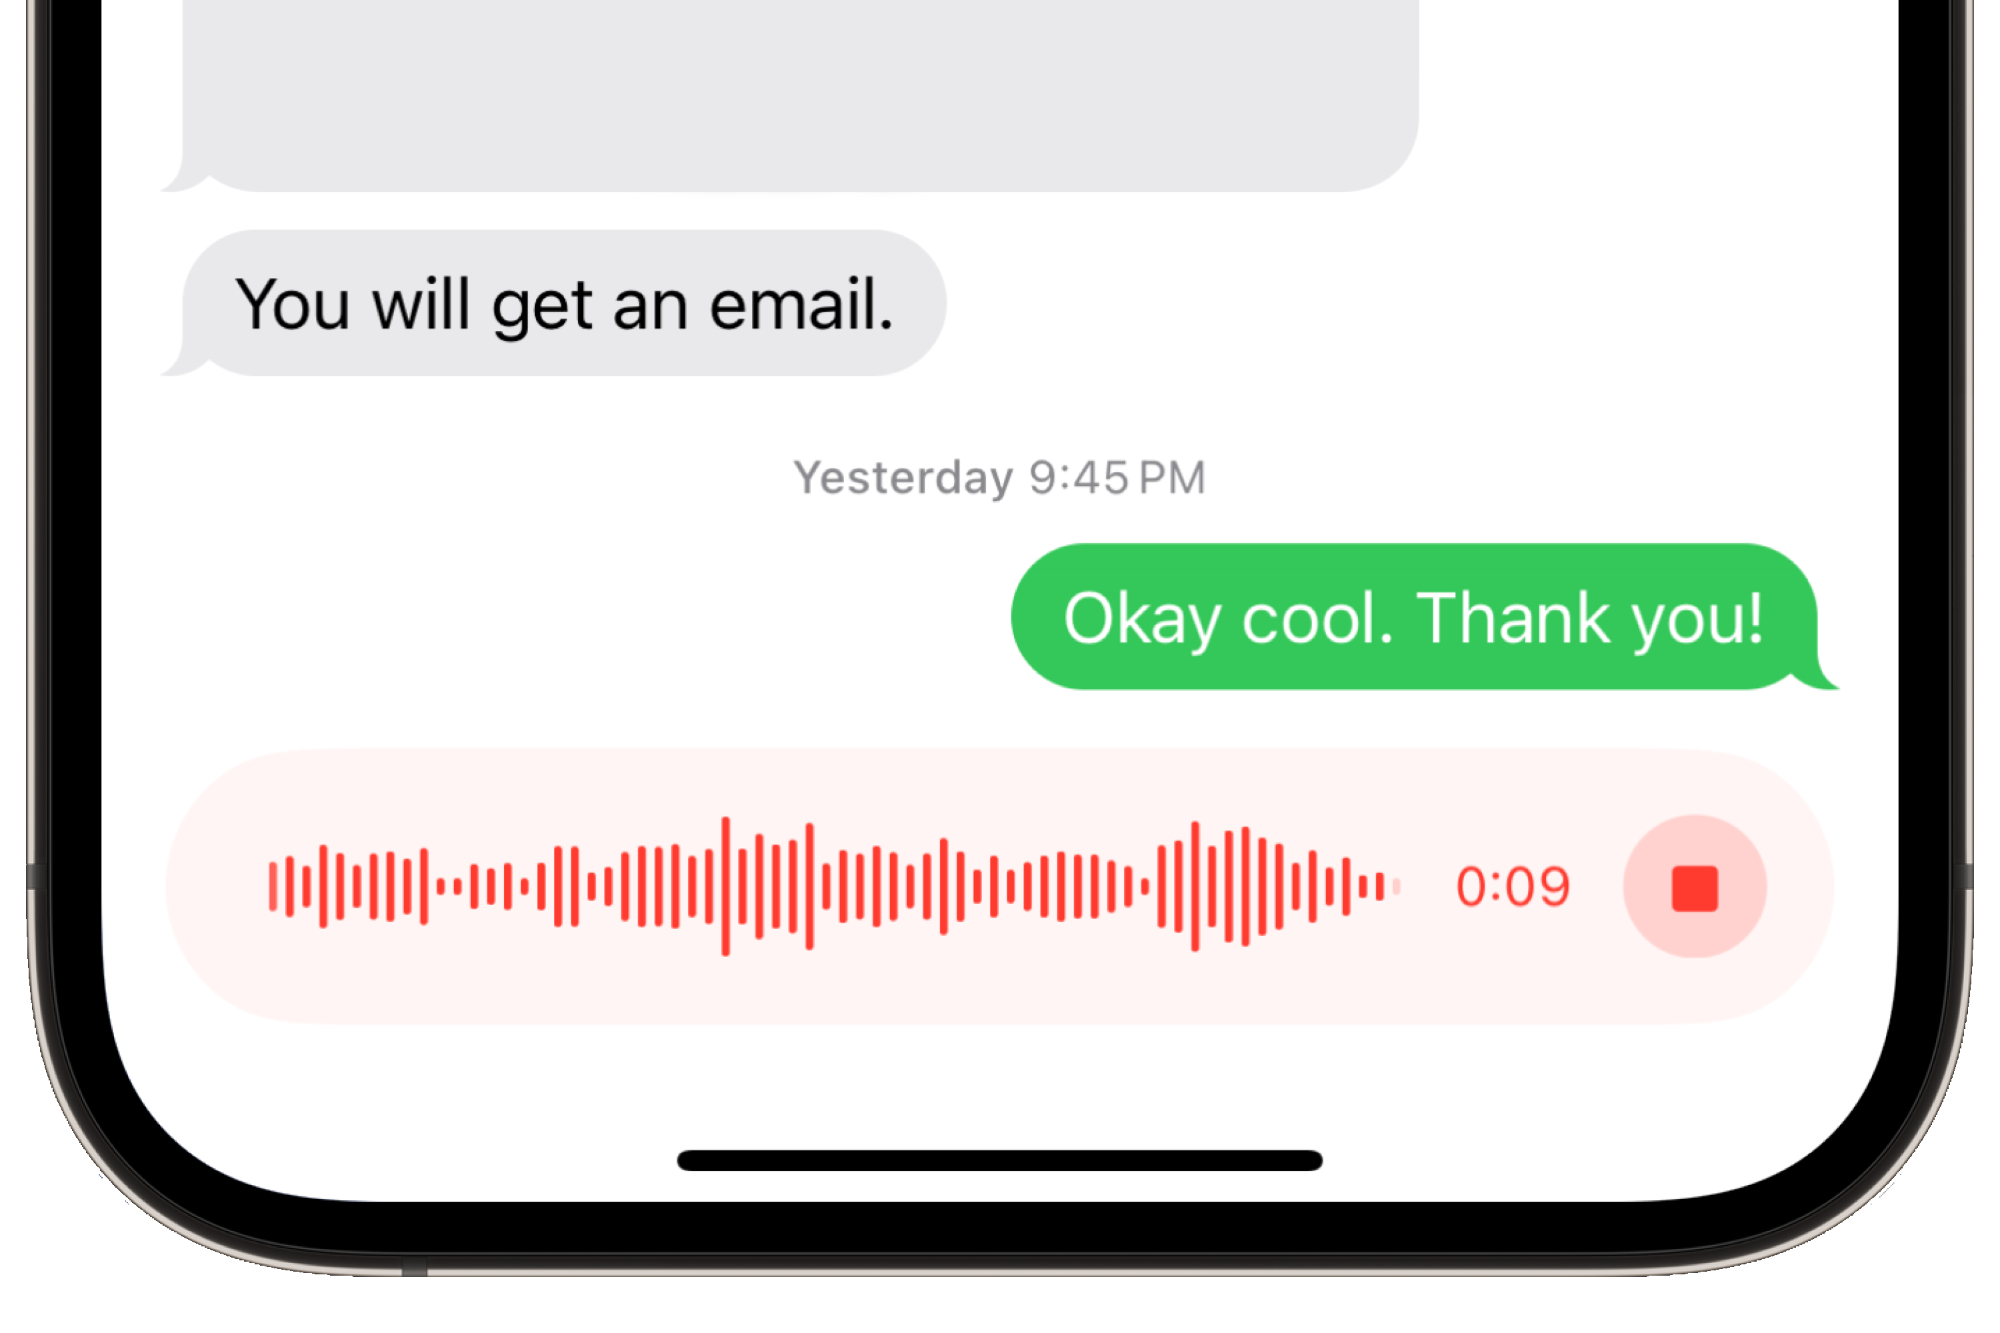 A screenshot of a voice message being recorded on an iPhone.